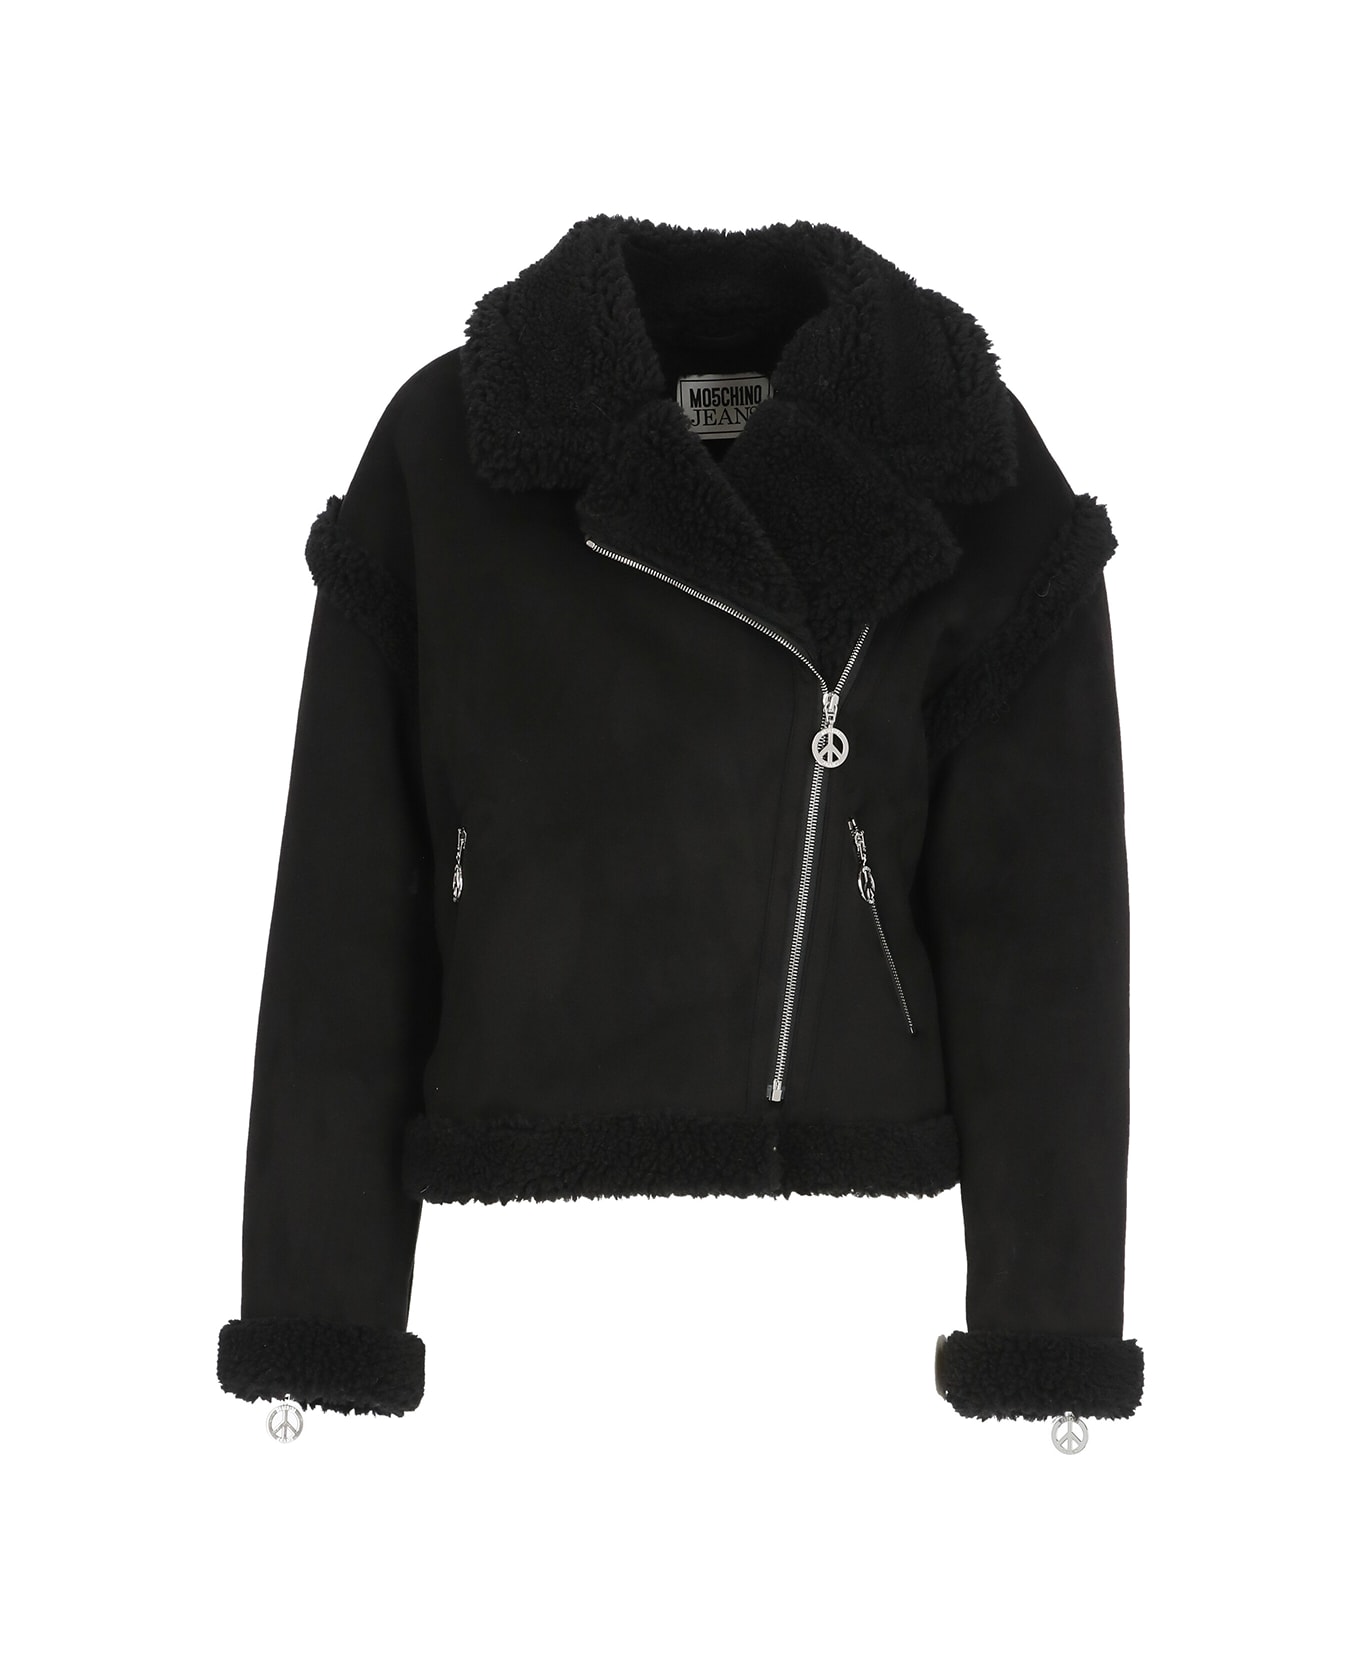 M05CH1N0 Jeans Jacket With Eco Fur - Black